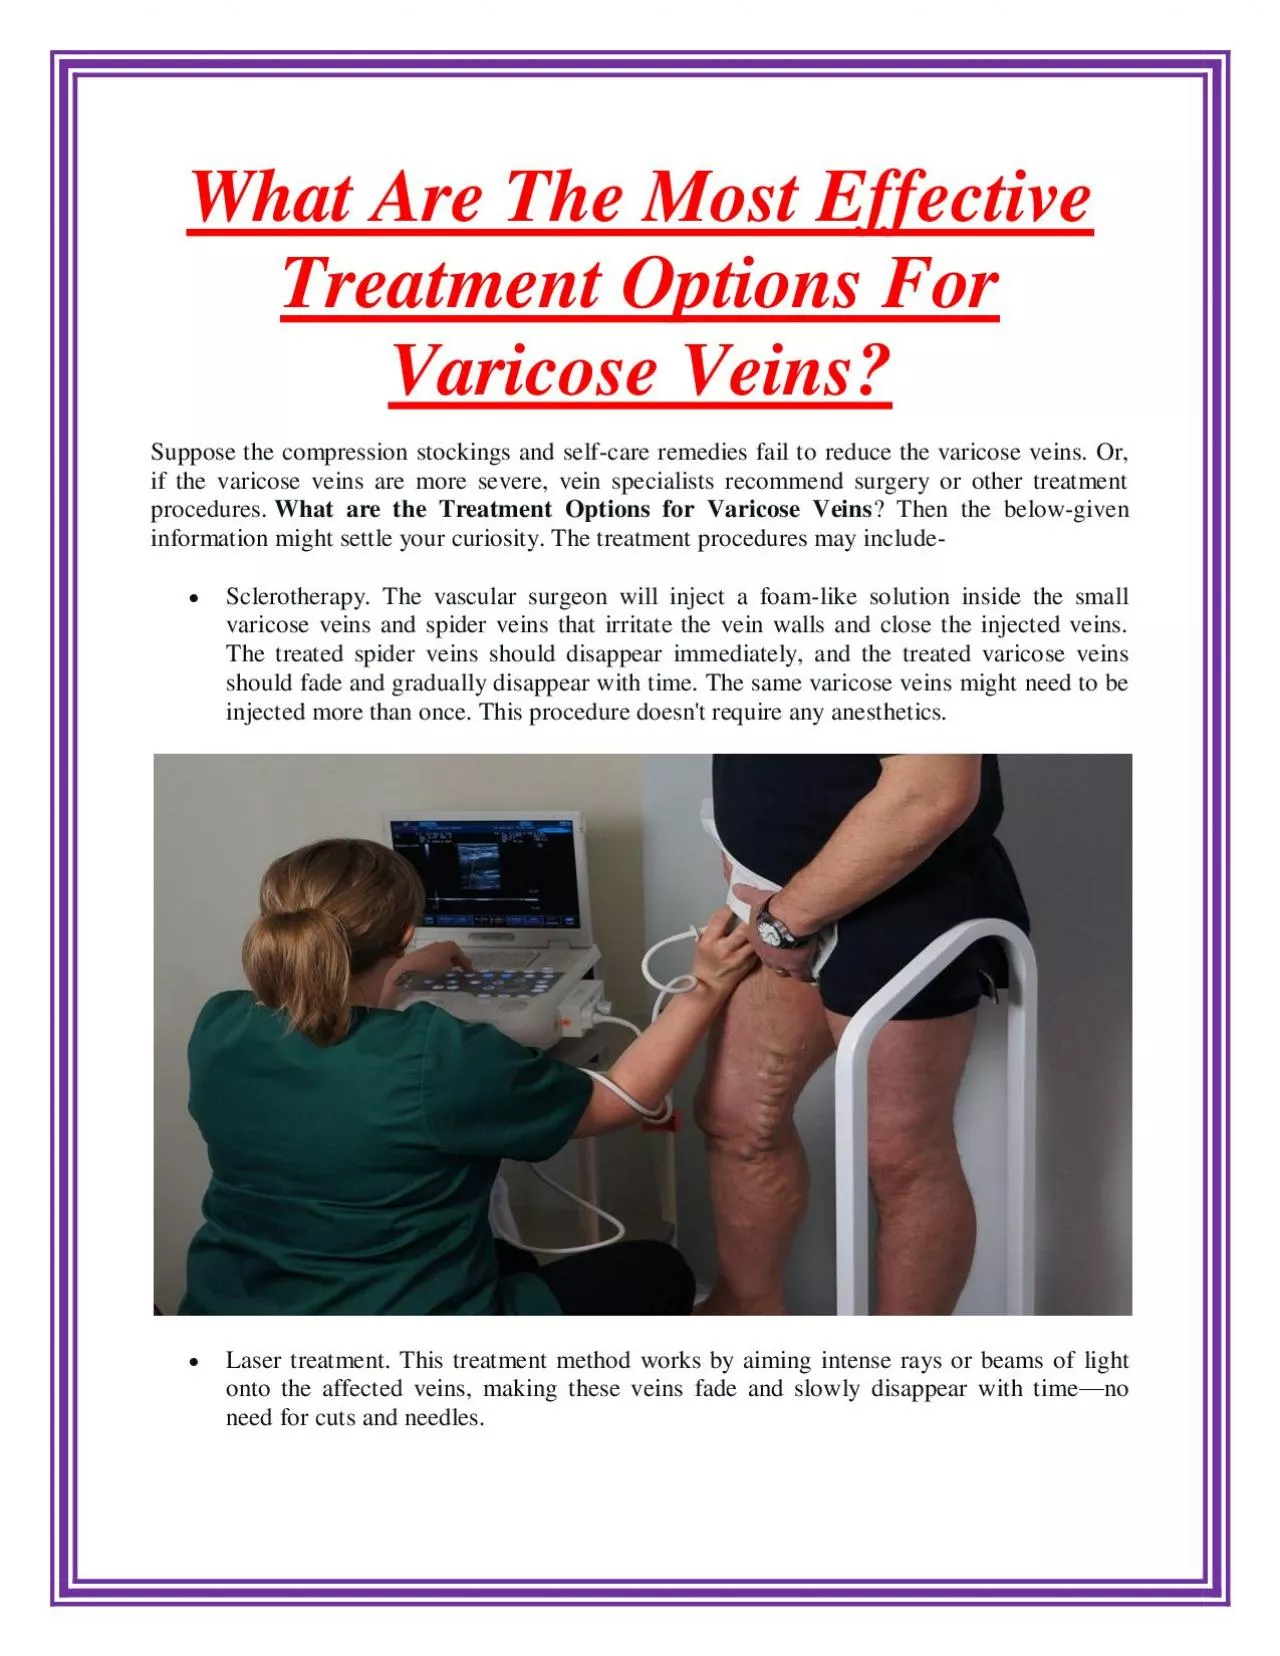 What Are The Most Effective Treatment Options For Varicose Veins?